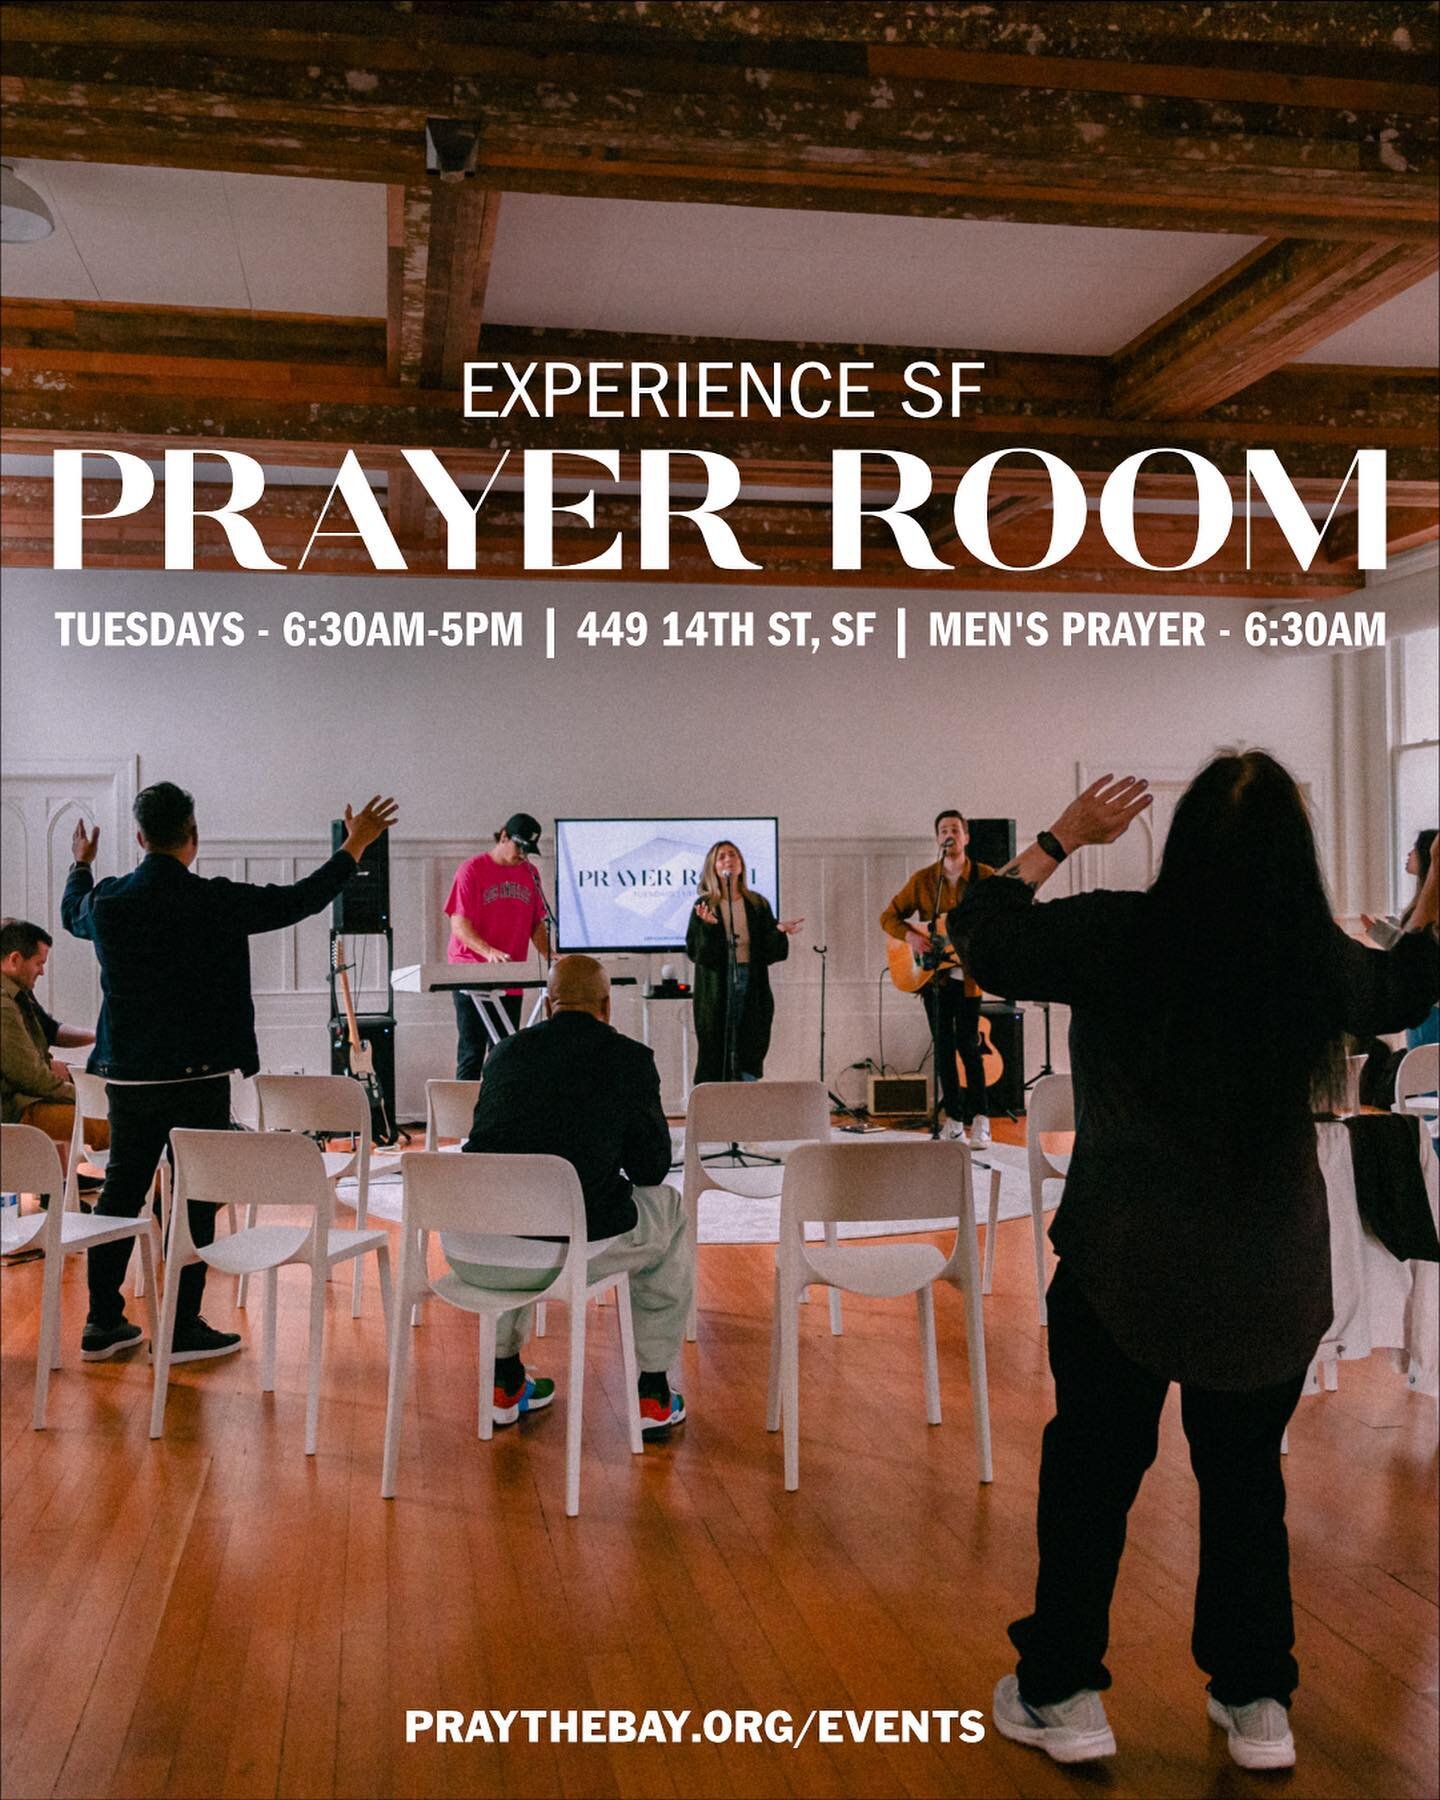 PTB PRAYER ROOMS 

Every week, we have prayer rooms open for you to come and encounter God. 

San Francisco | TUESDAYS 

MEN&rsquo;S PRAYER &mdash; 6:30AM

COMMUNAL PRAYER &mdash; 12PM

SELF-LED PRAYER &mdash; 7:30AM-5PM

Fairfield | WEDNESDAYS 

COM